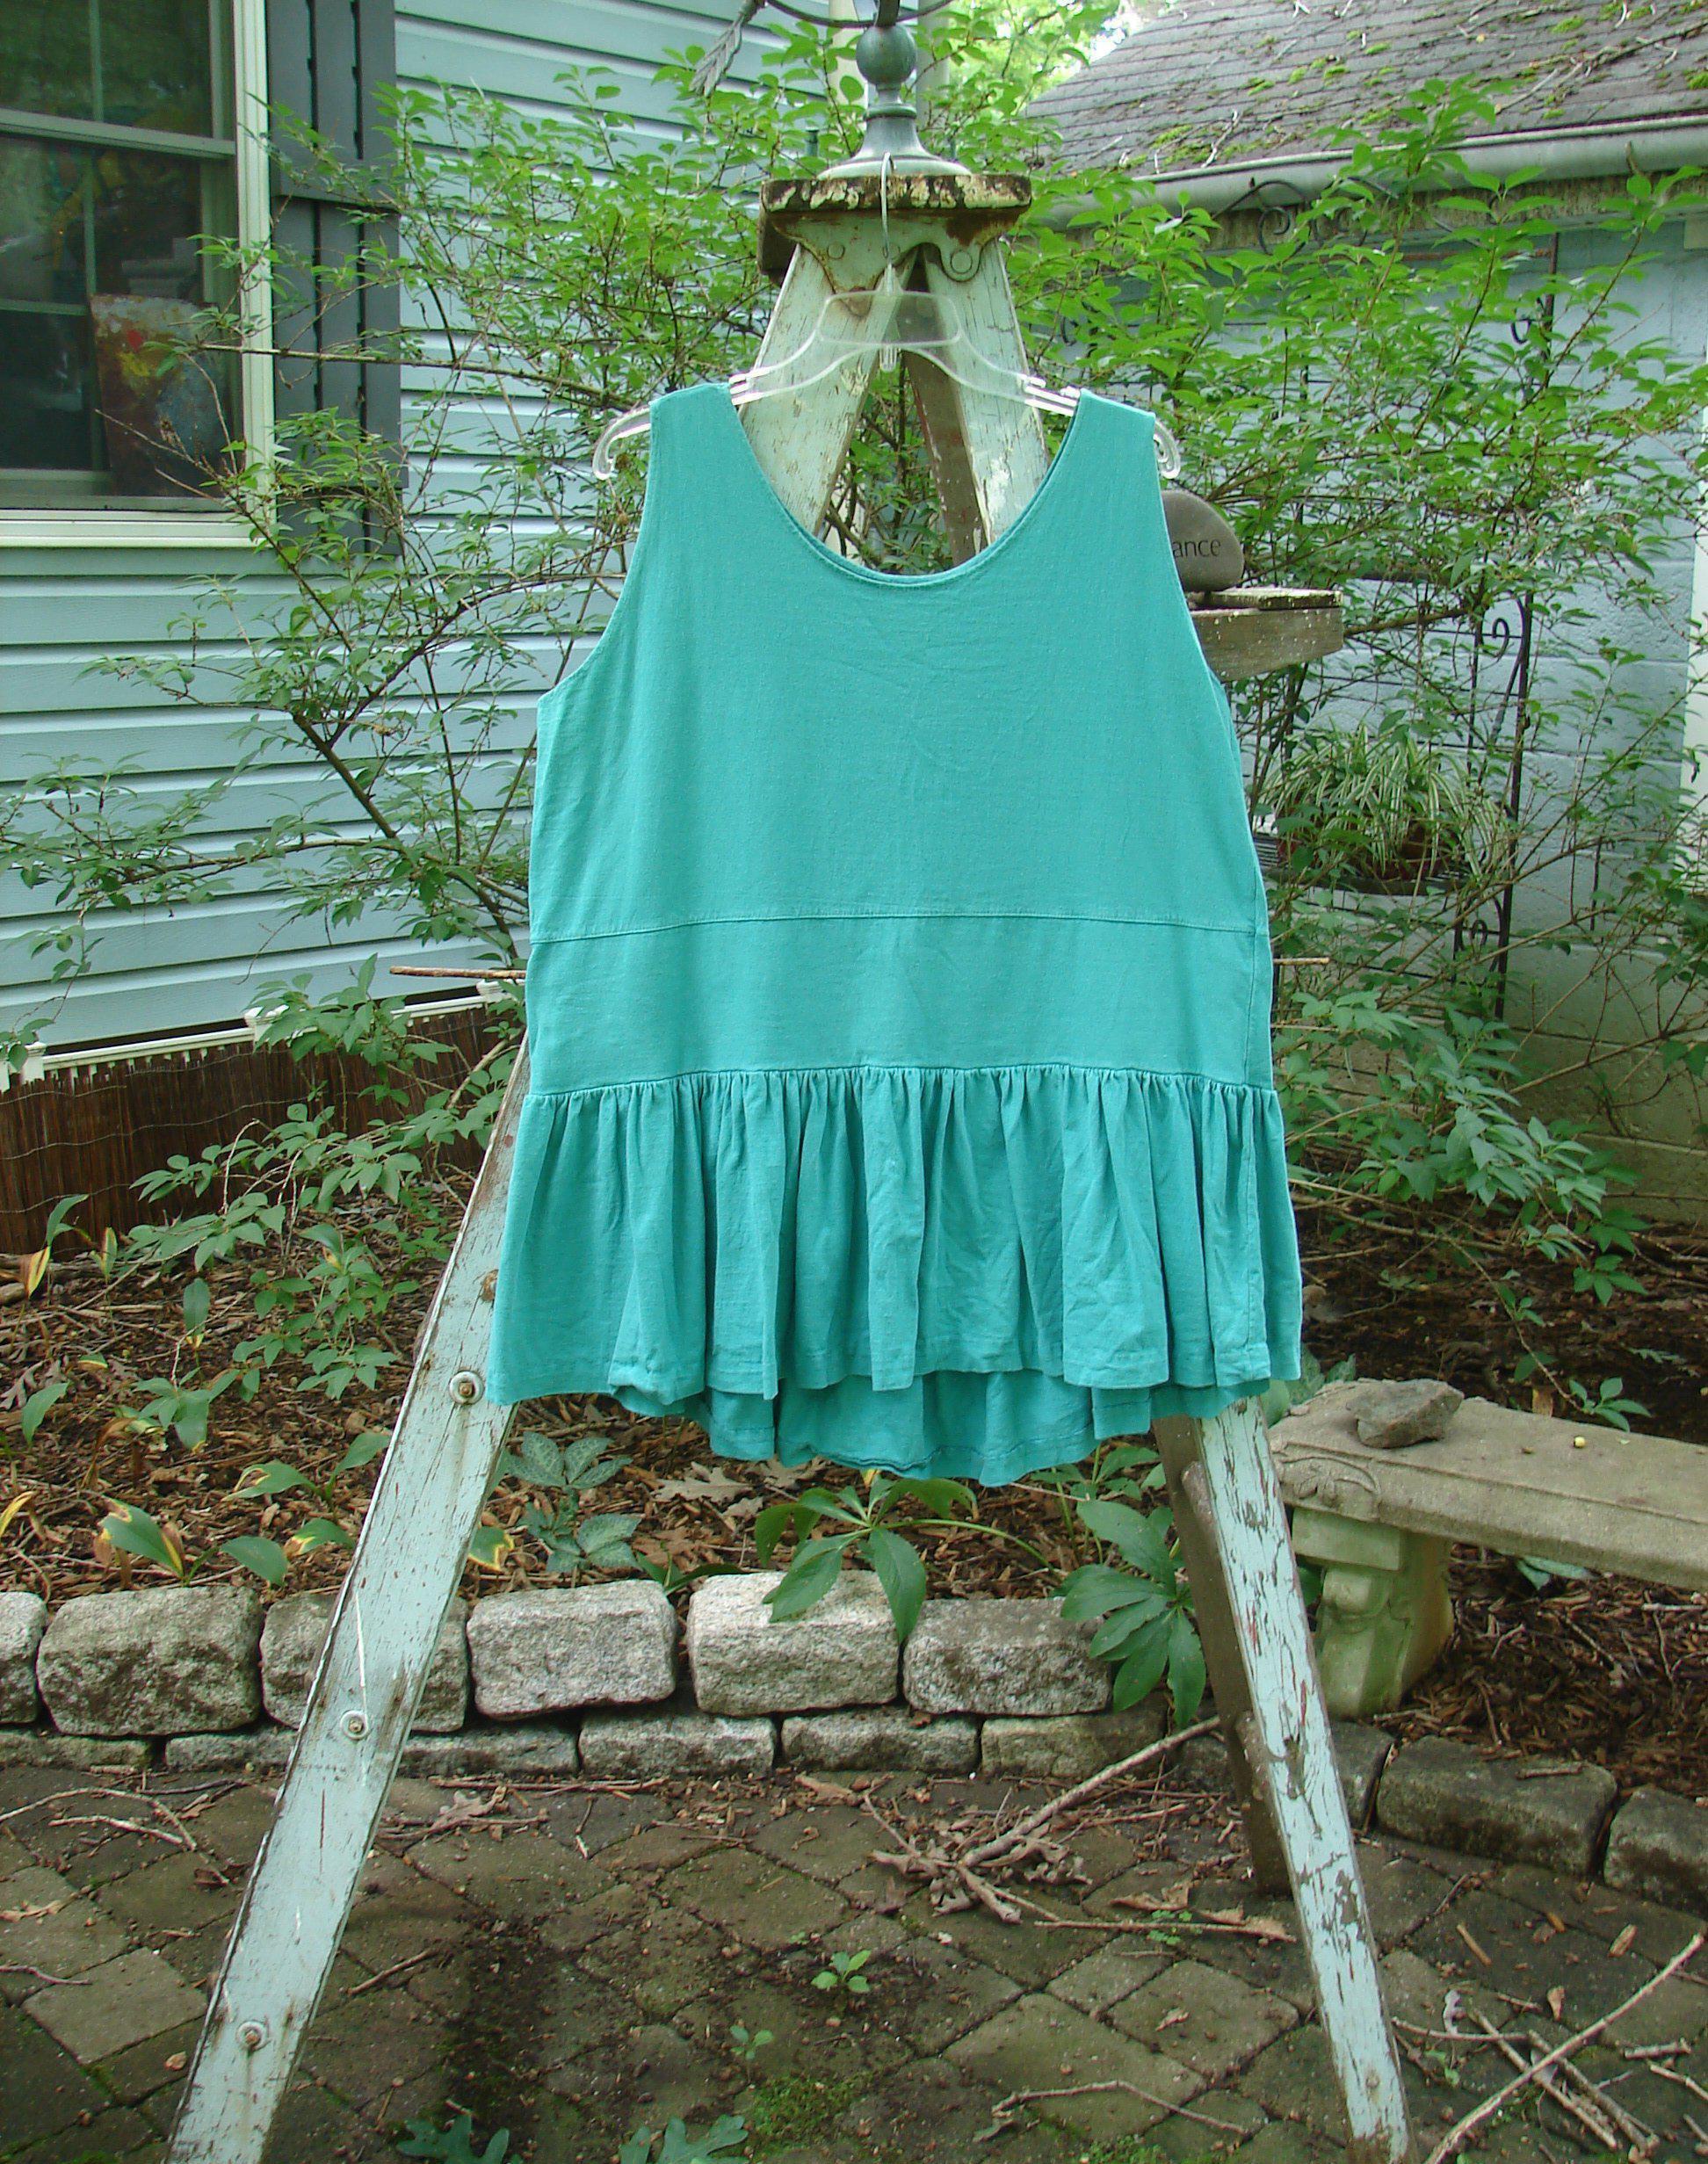 Image alt text: "1990 Button Tier Top in Turq on a ladder, featuring a gathered flounce, drop waistband, and ruffled hemline."